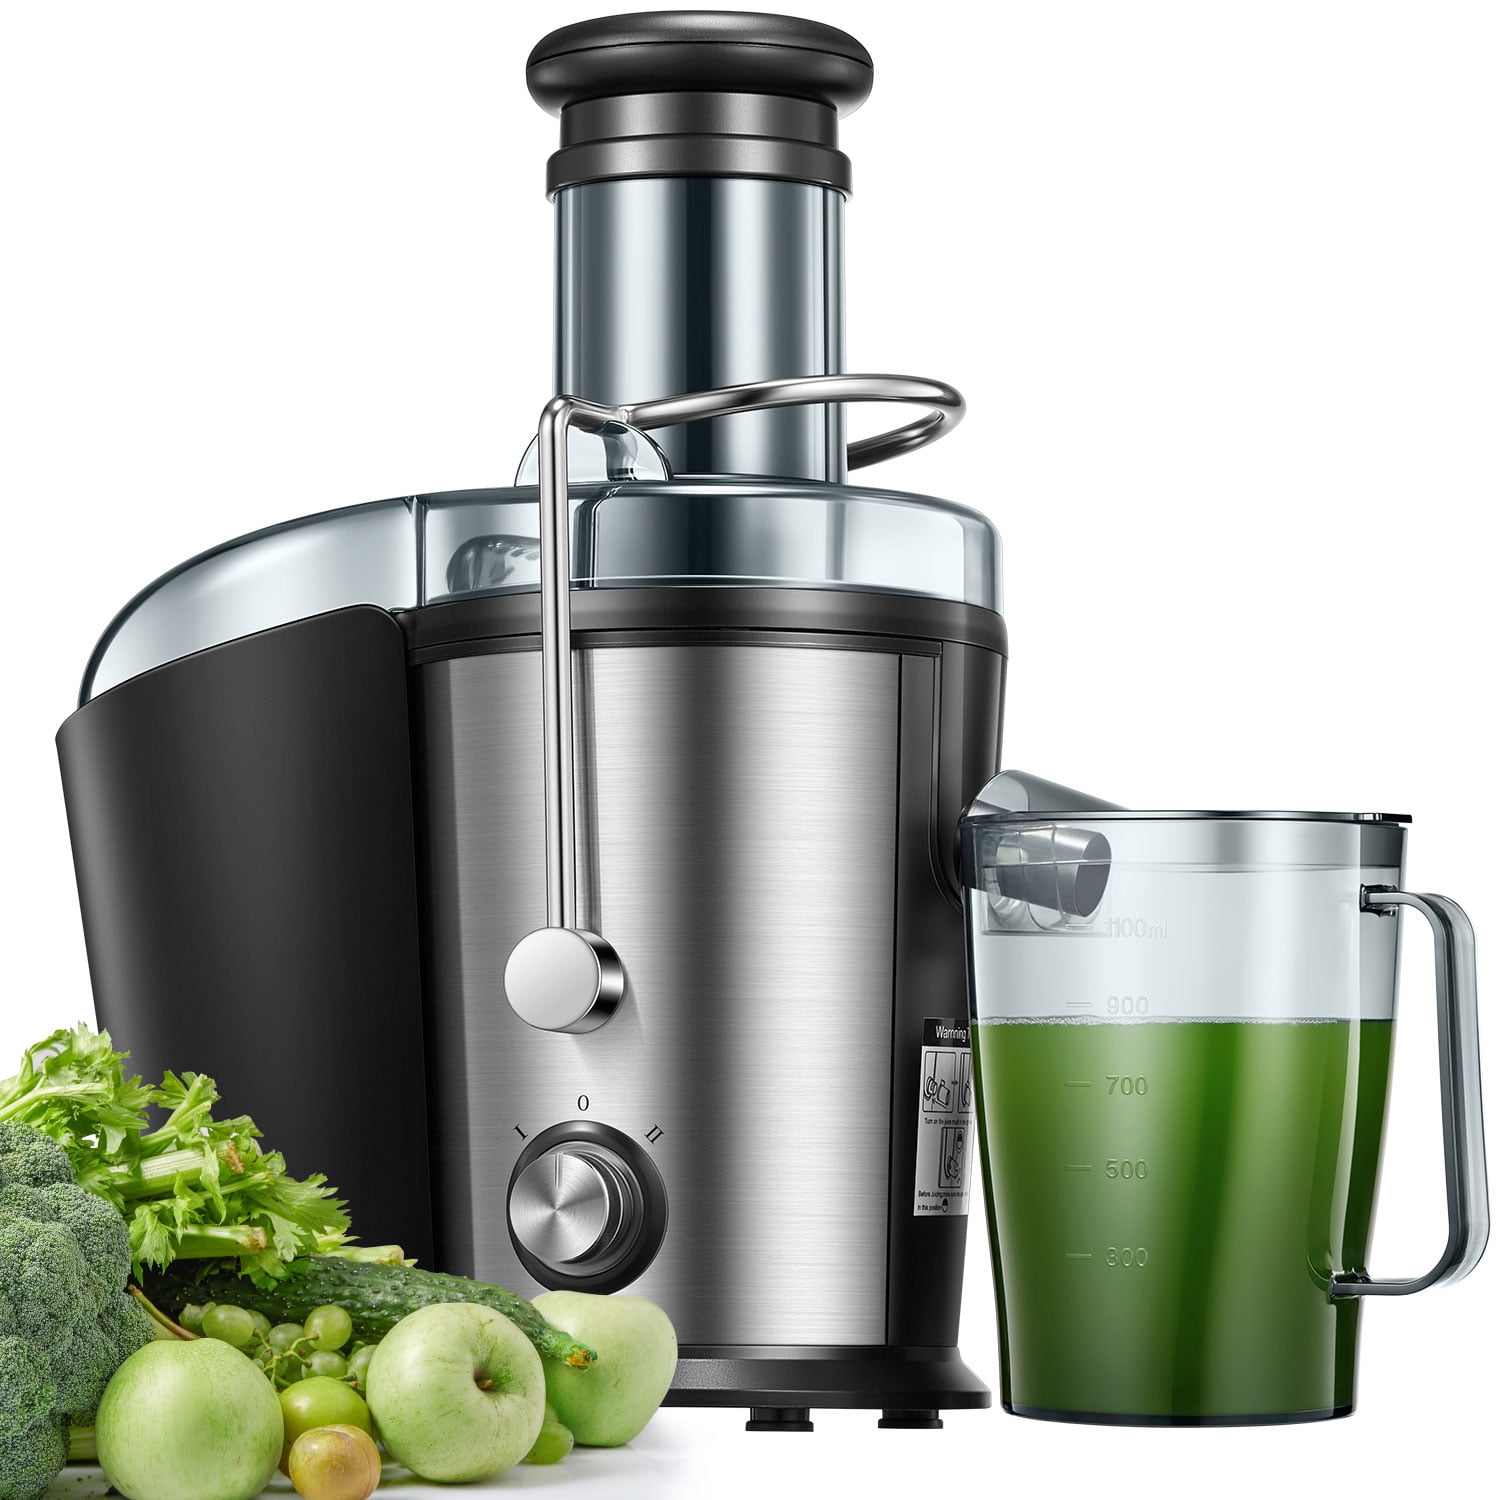 Dash Compact Centrifugal Juicer, Press Juicing Machine, 2-Speed, 2 Wide Feed Chute for Whole Fruit Vegetable, Anti-Drip, Stainless Steel Sieve - Cool